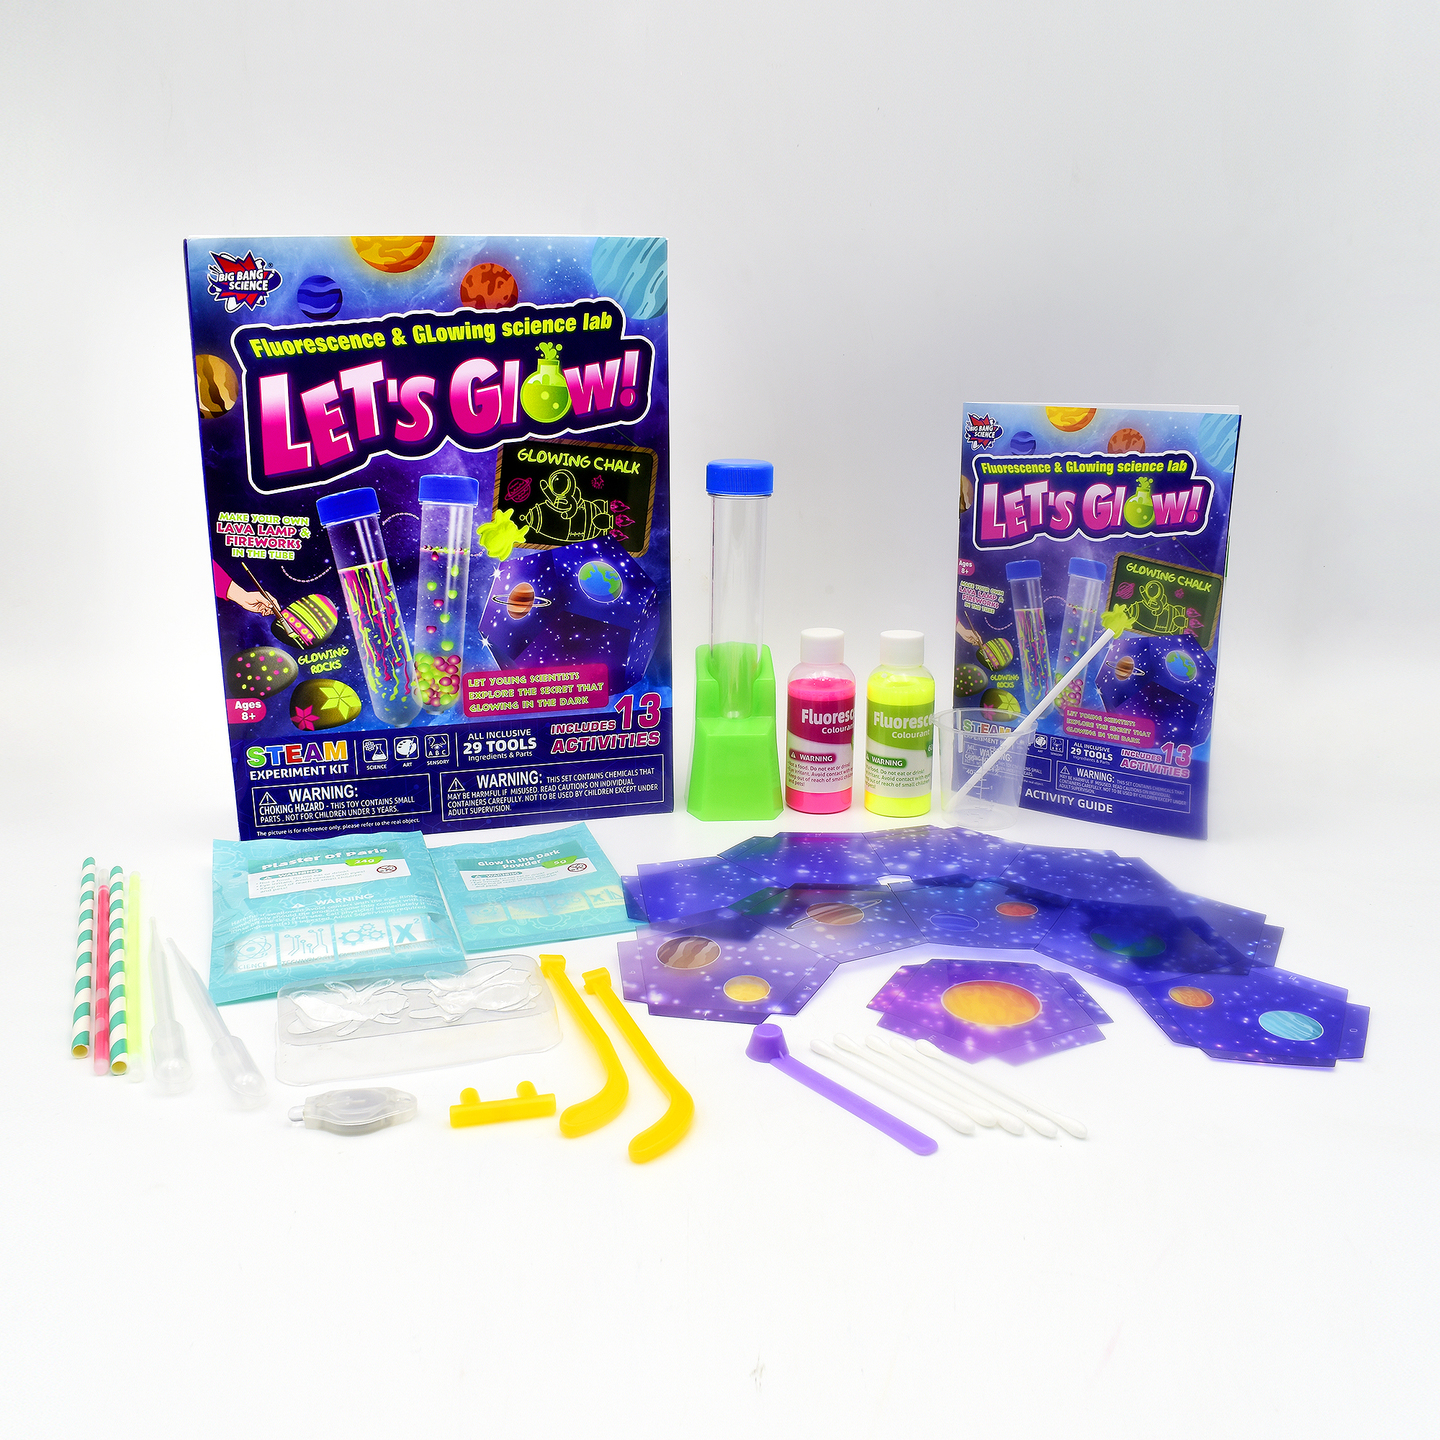 STEM Big Bang Let's Glow Fluorescence and Glowing Fun Science Experiments for Kids